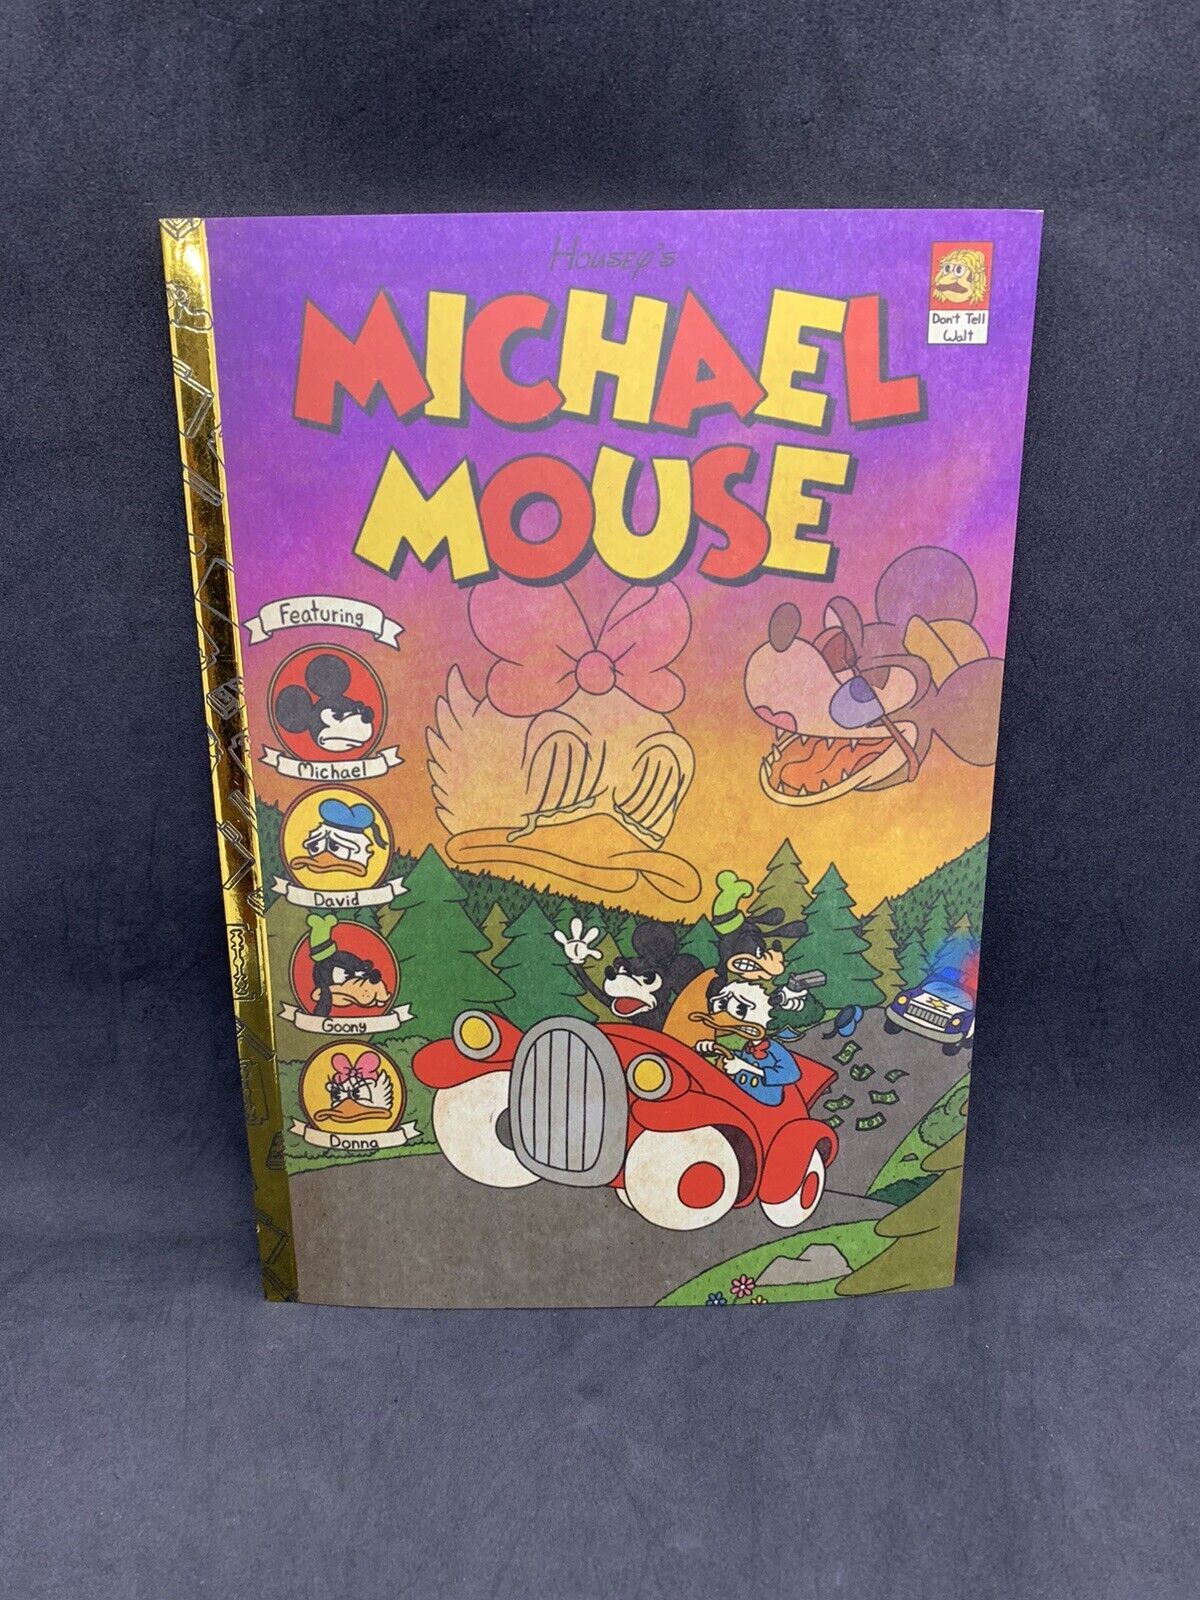 MICHAEL MOUSE 1 Floating World Comics TPB 72 Pages Collected Edition IN HAND